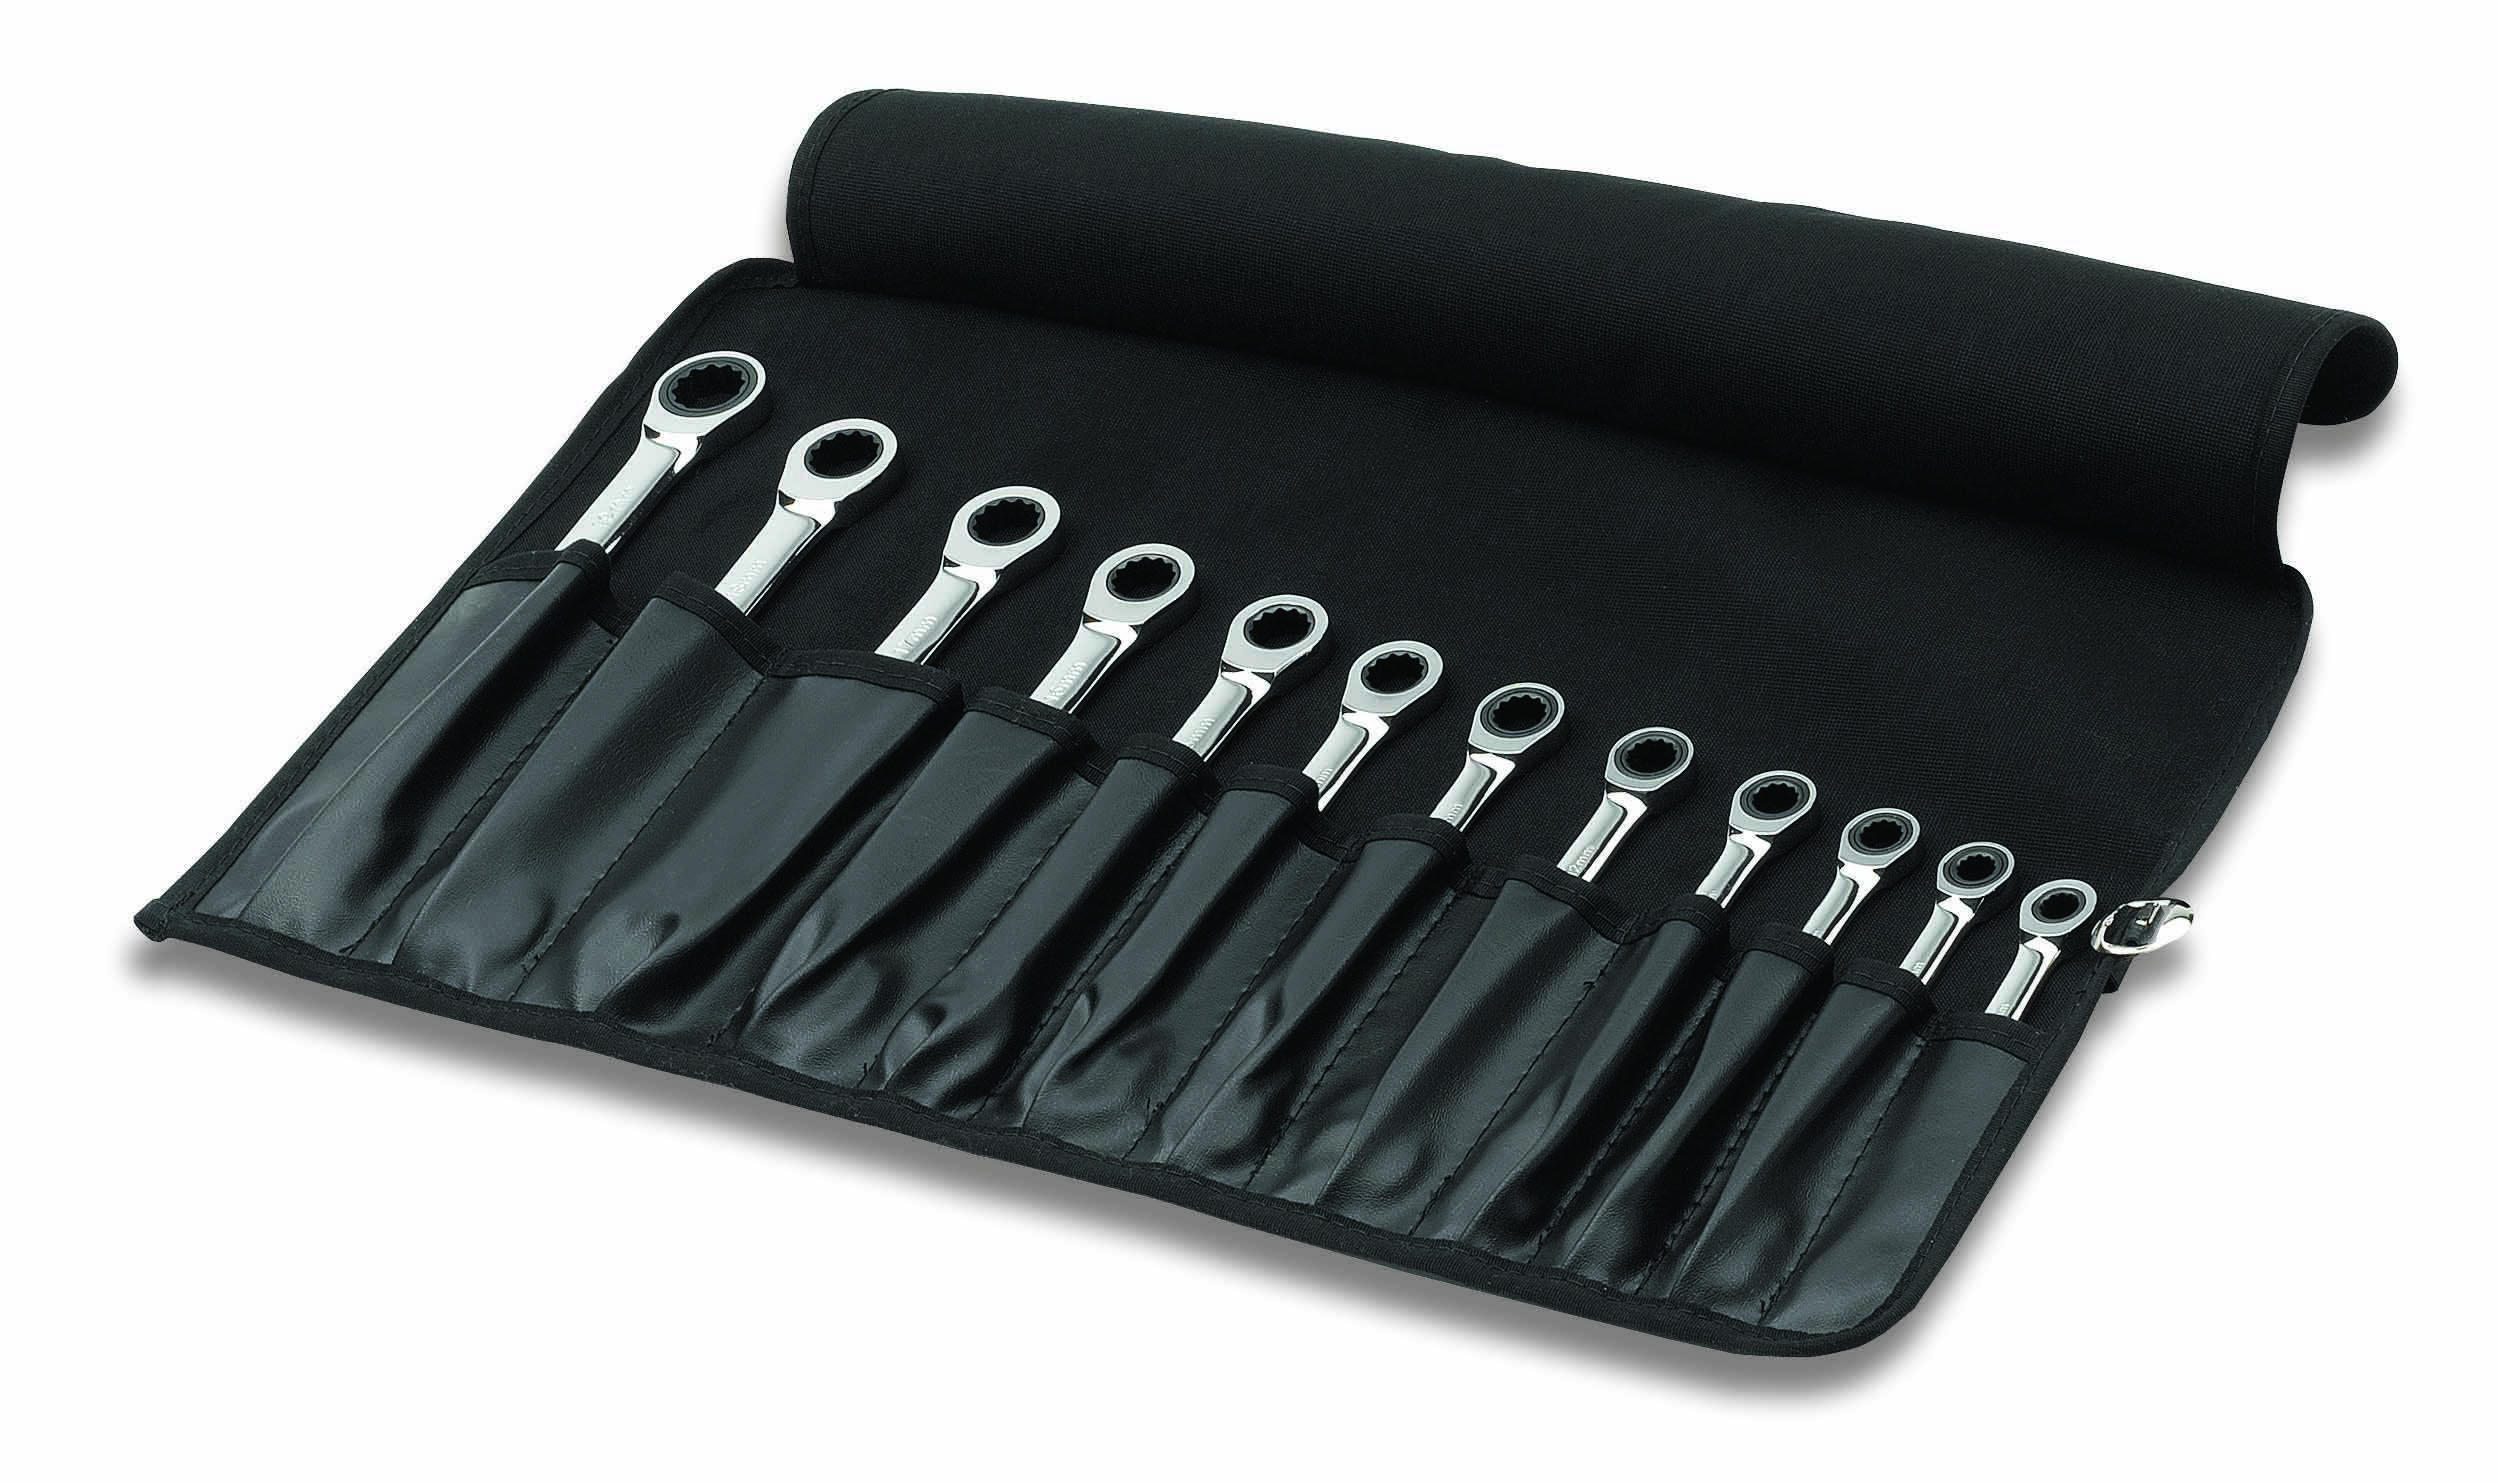 Ratcheting crowfoot wrench set